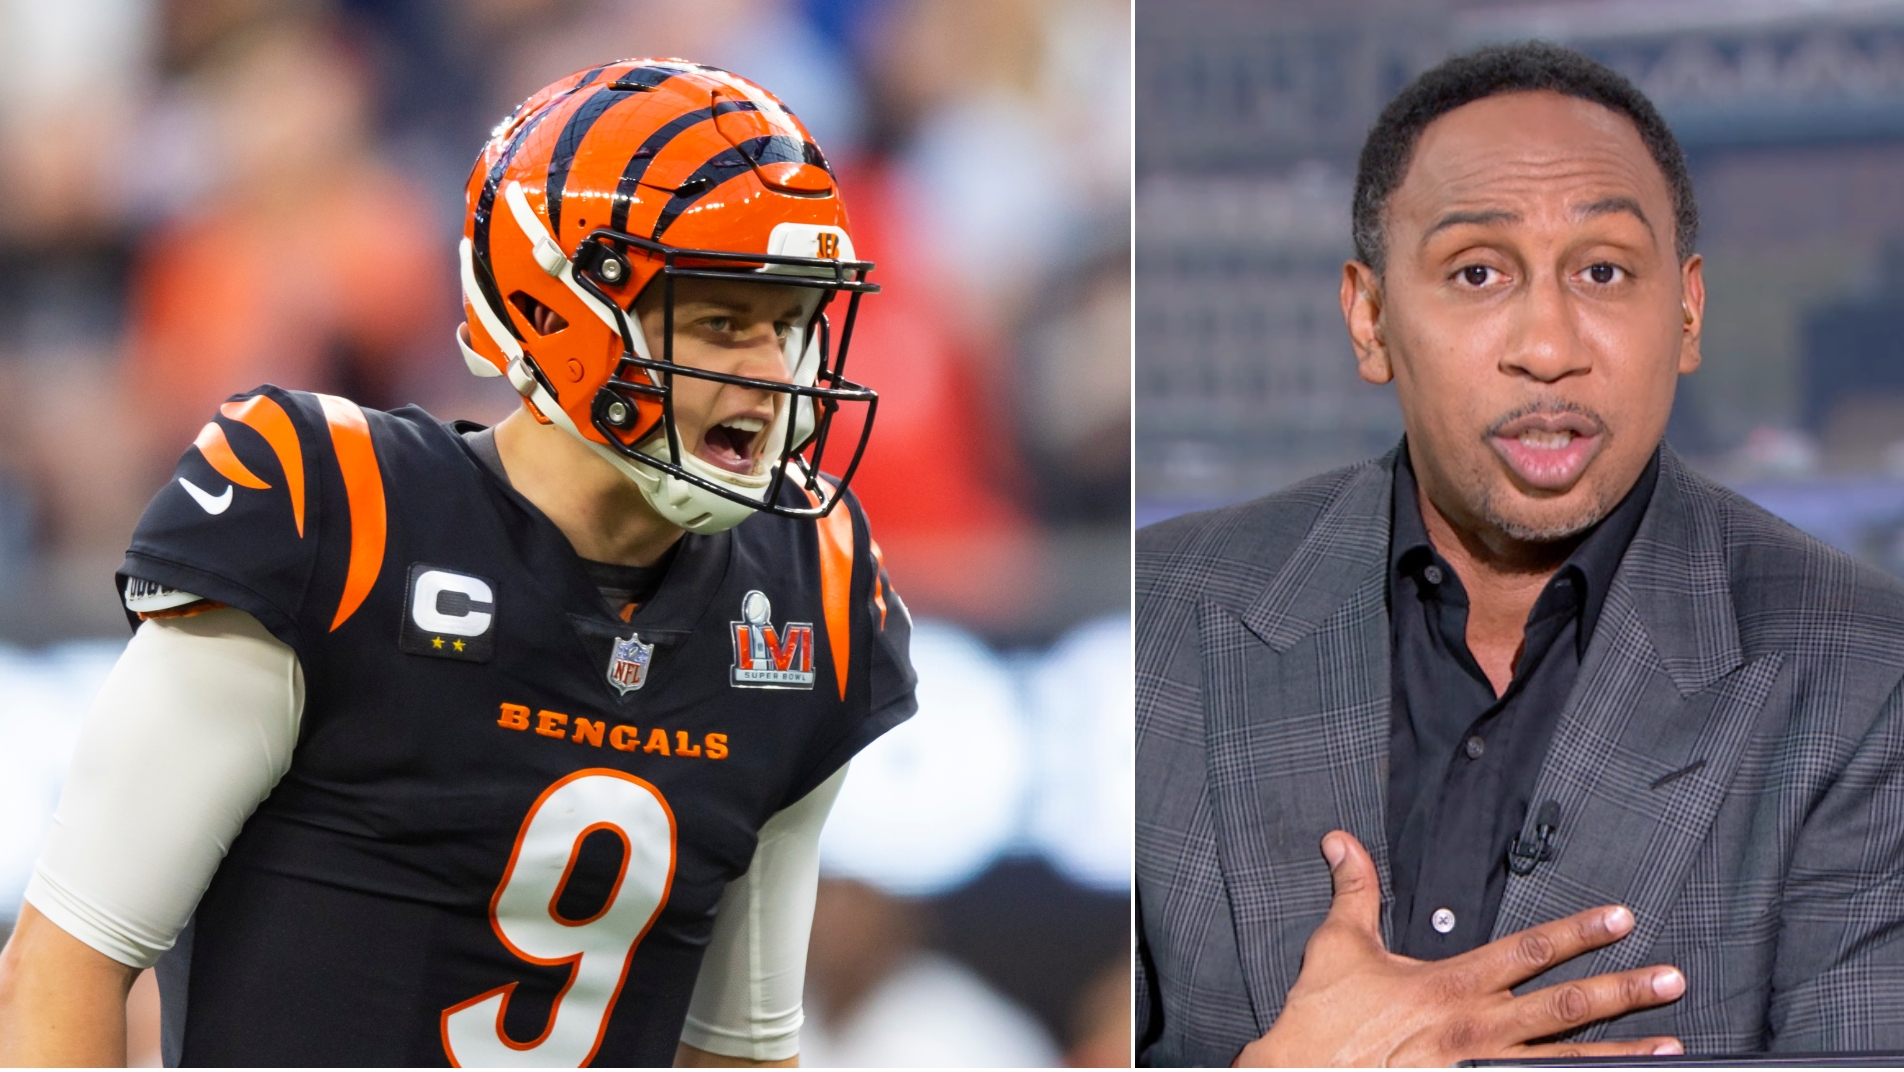 Why Stephen A. isn't sleeping on the Bengals - Stream the Video